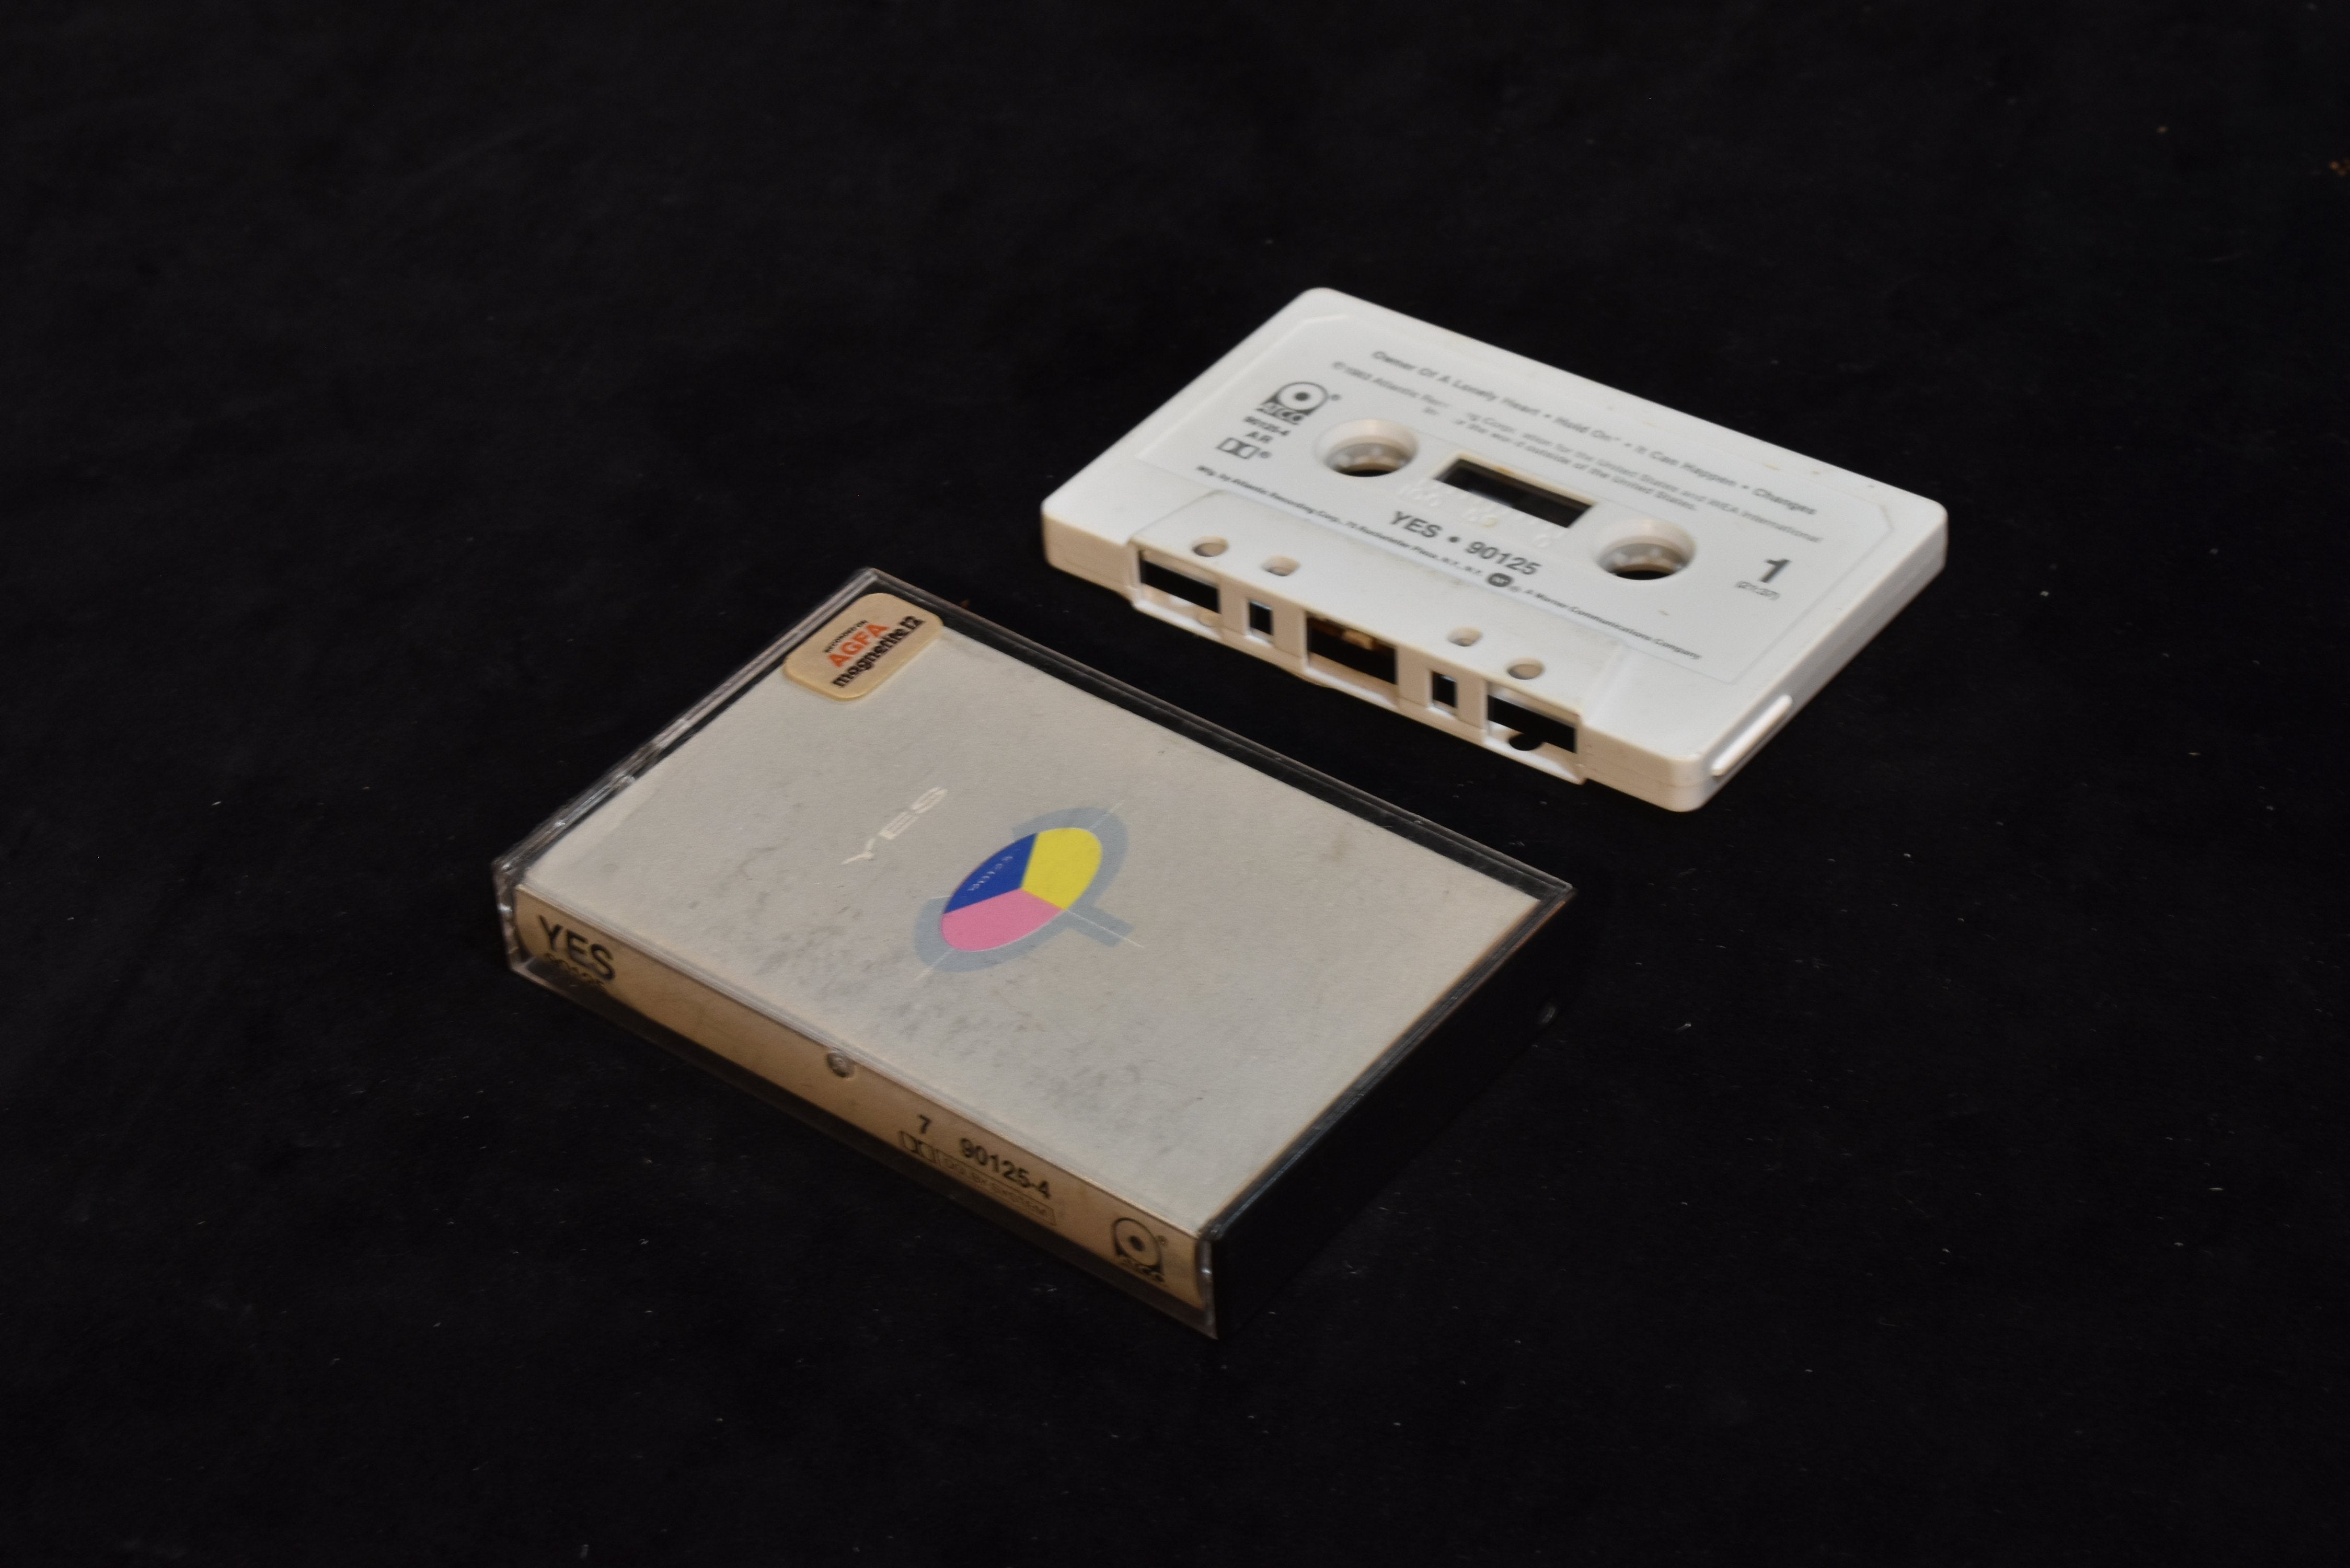 Yes tape used 90125 cassette tape used